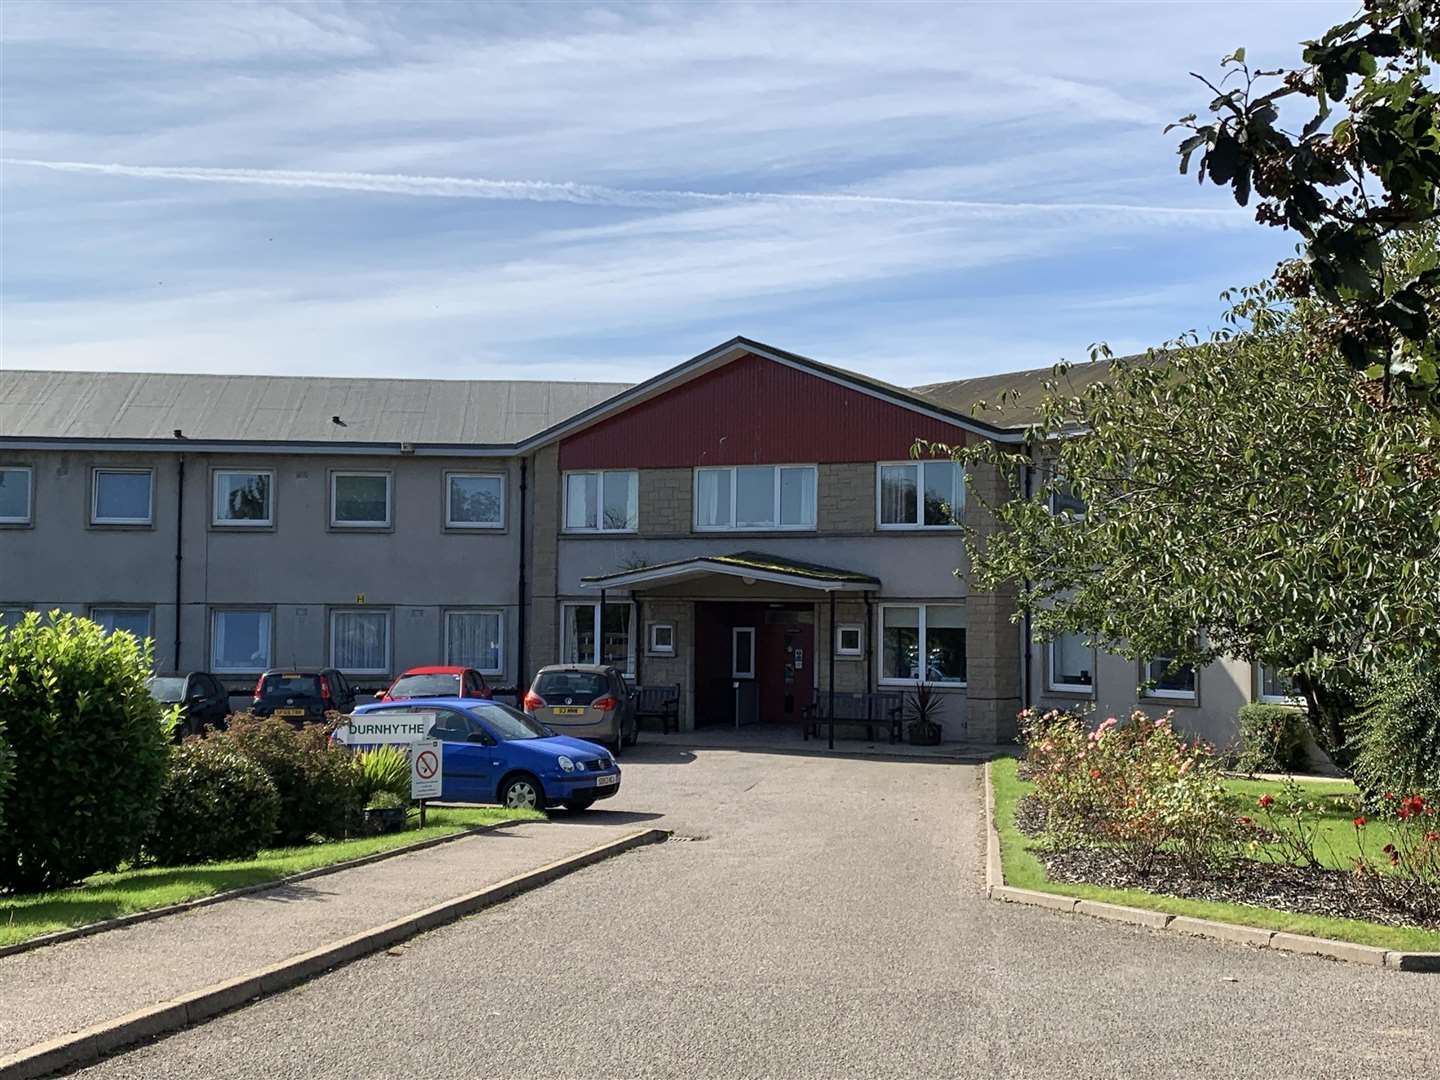 An improvement action plan has been implemented at Durnhythe Care Home in Portsoy.